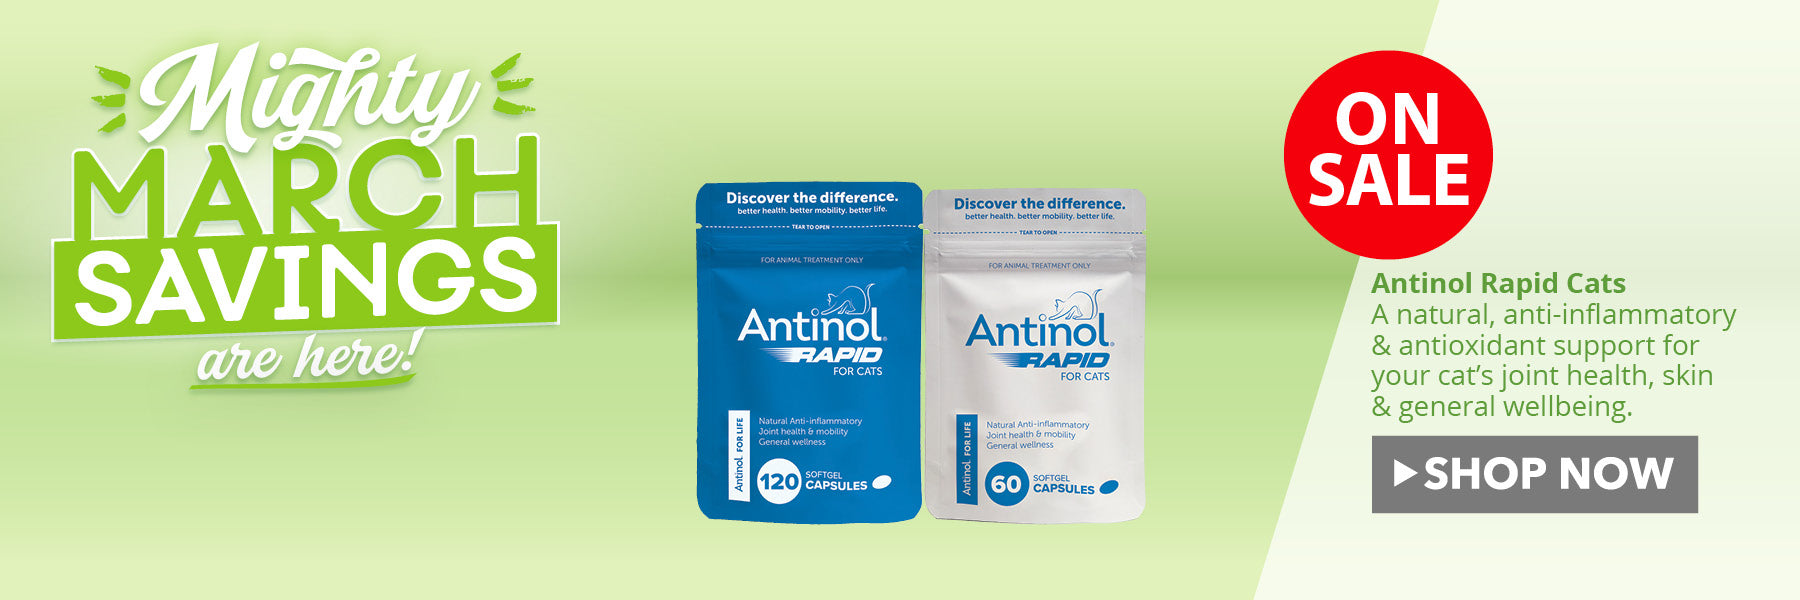 Antinol for Cats ON SALE NOW